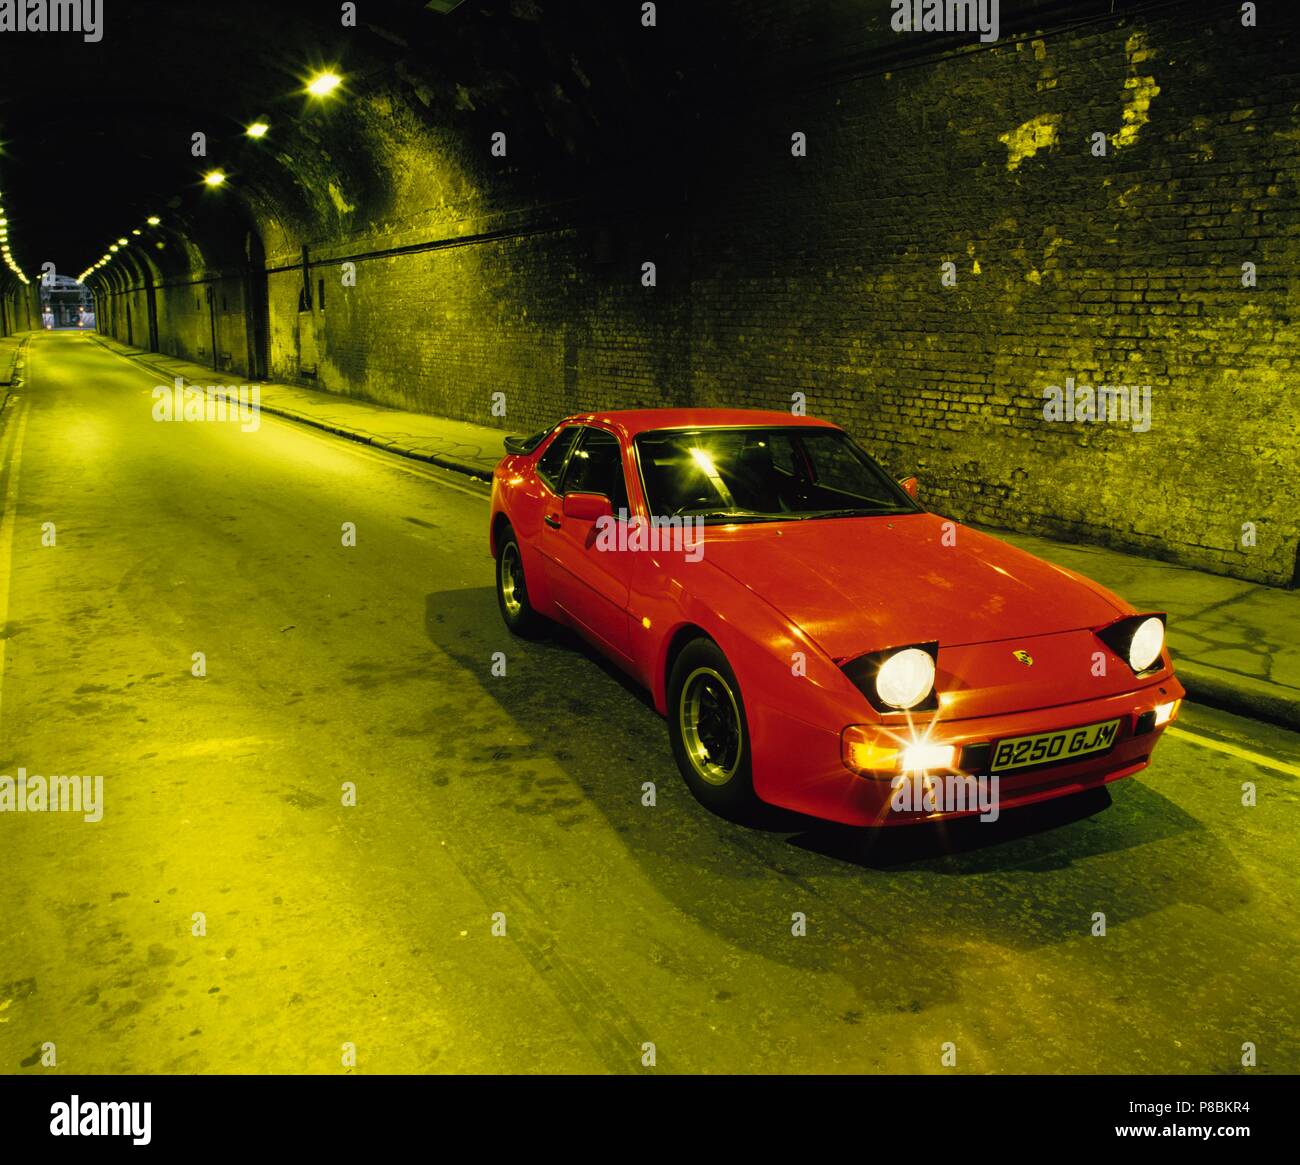 Porsche 944 1985 model year with pop up headlights lit up in an urban tunnel Stock Photo